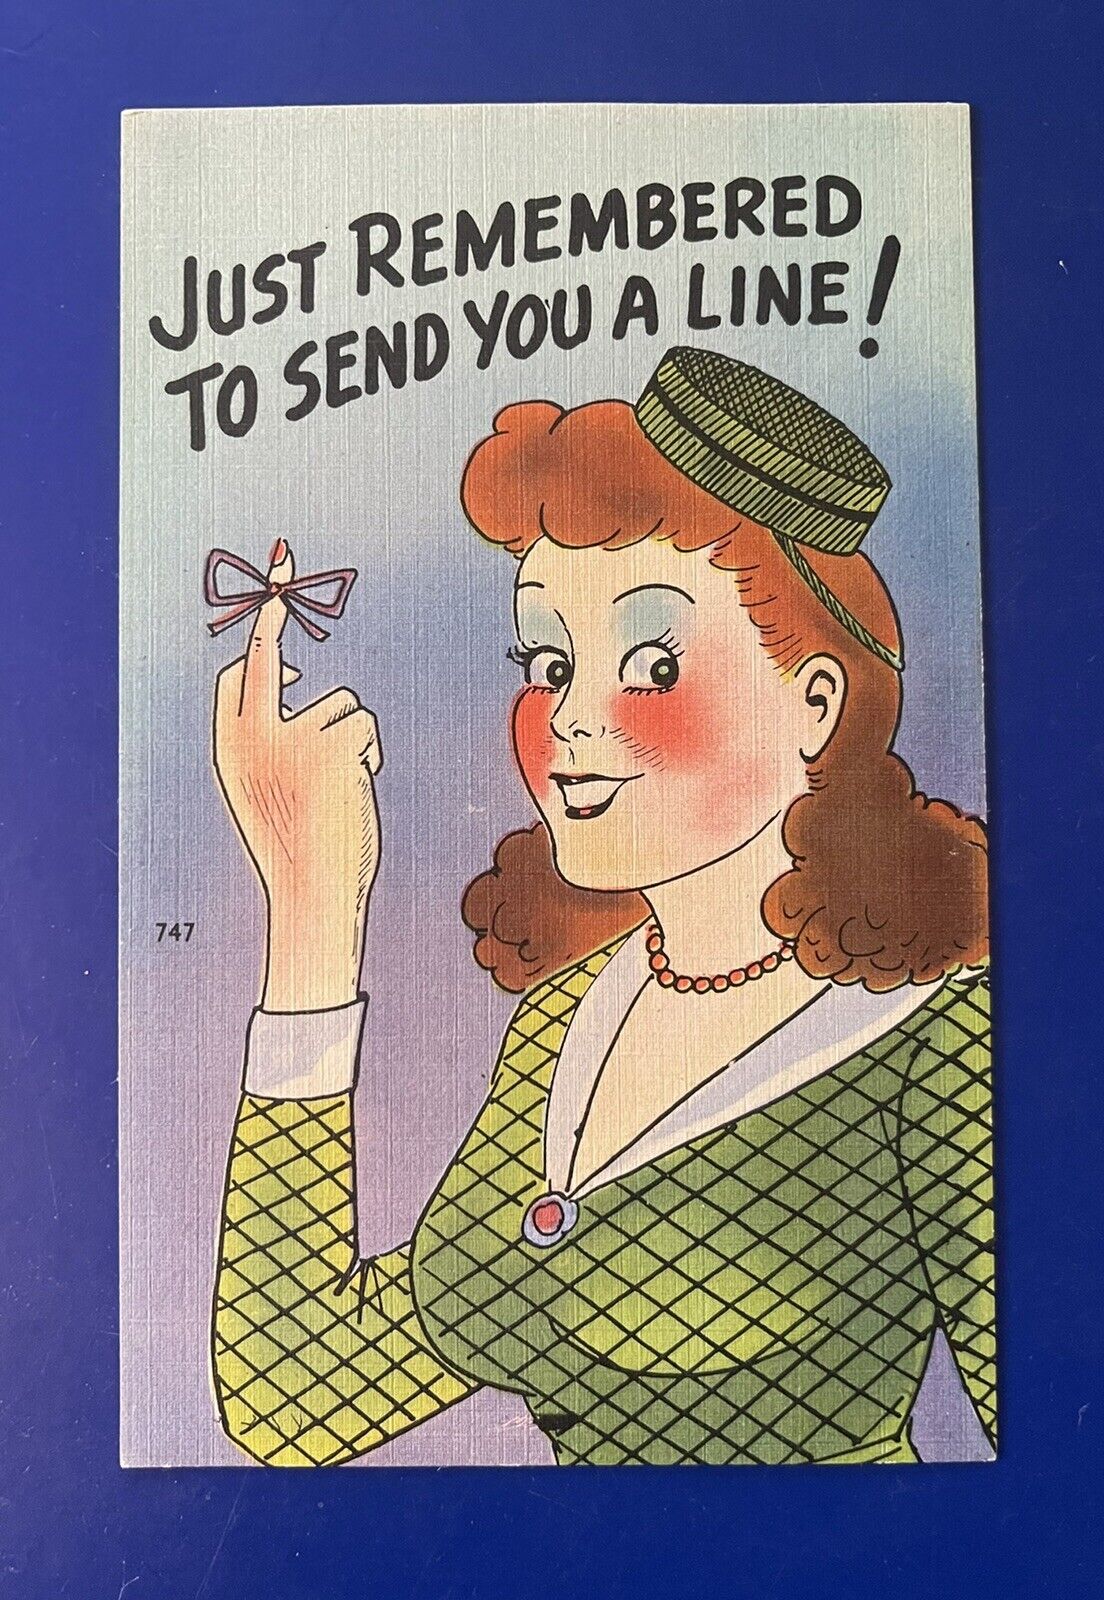 Vintage Risqué Comic Linen Postcard 40s Humor Just Remembered To Send You A Line